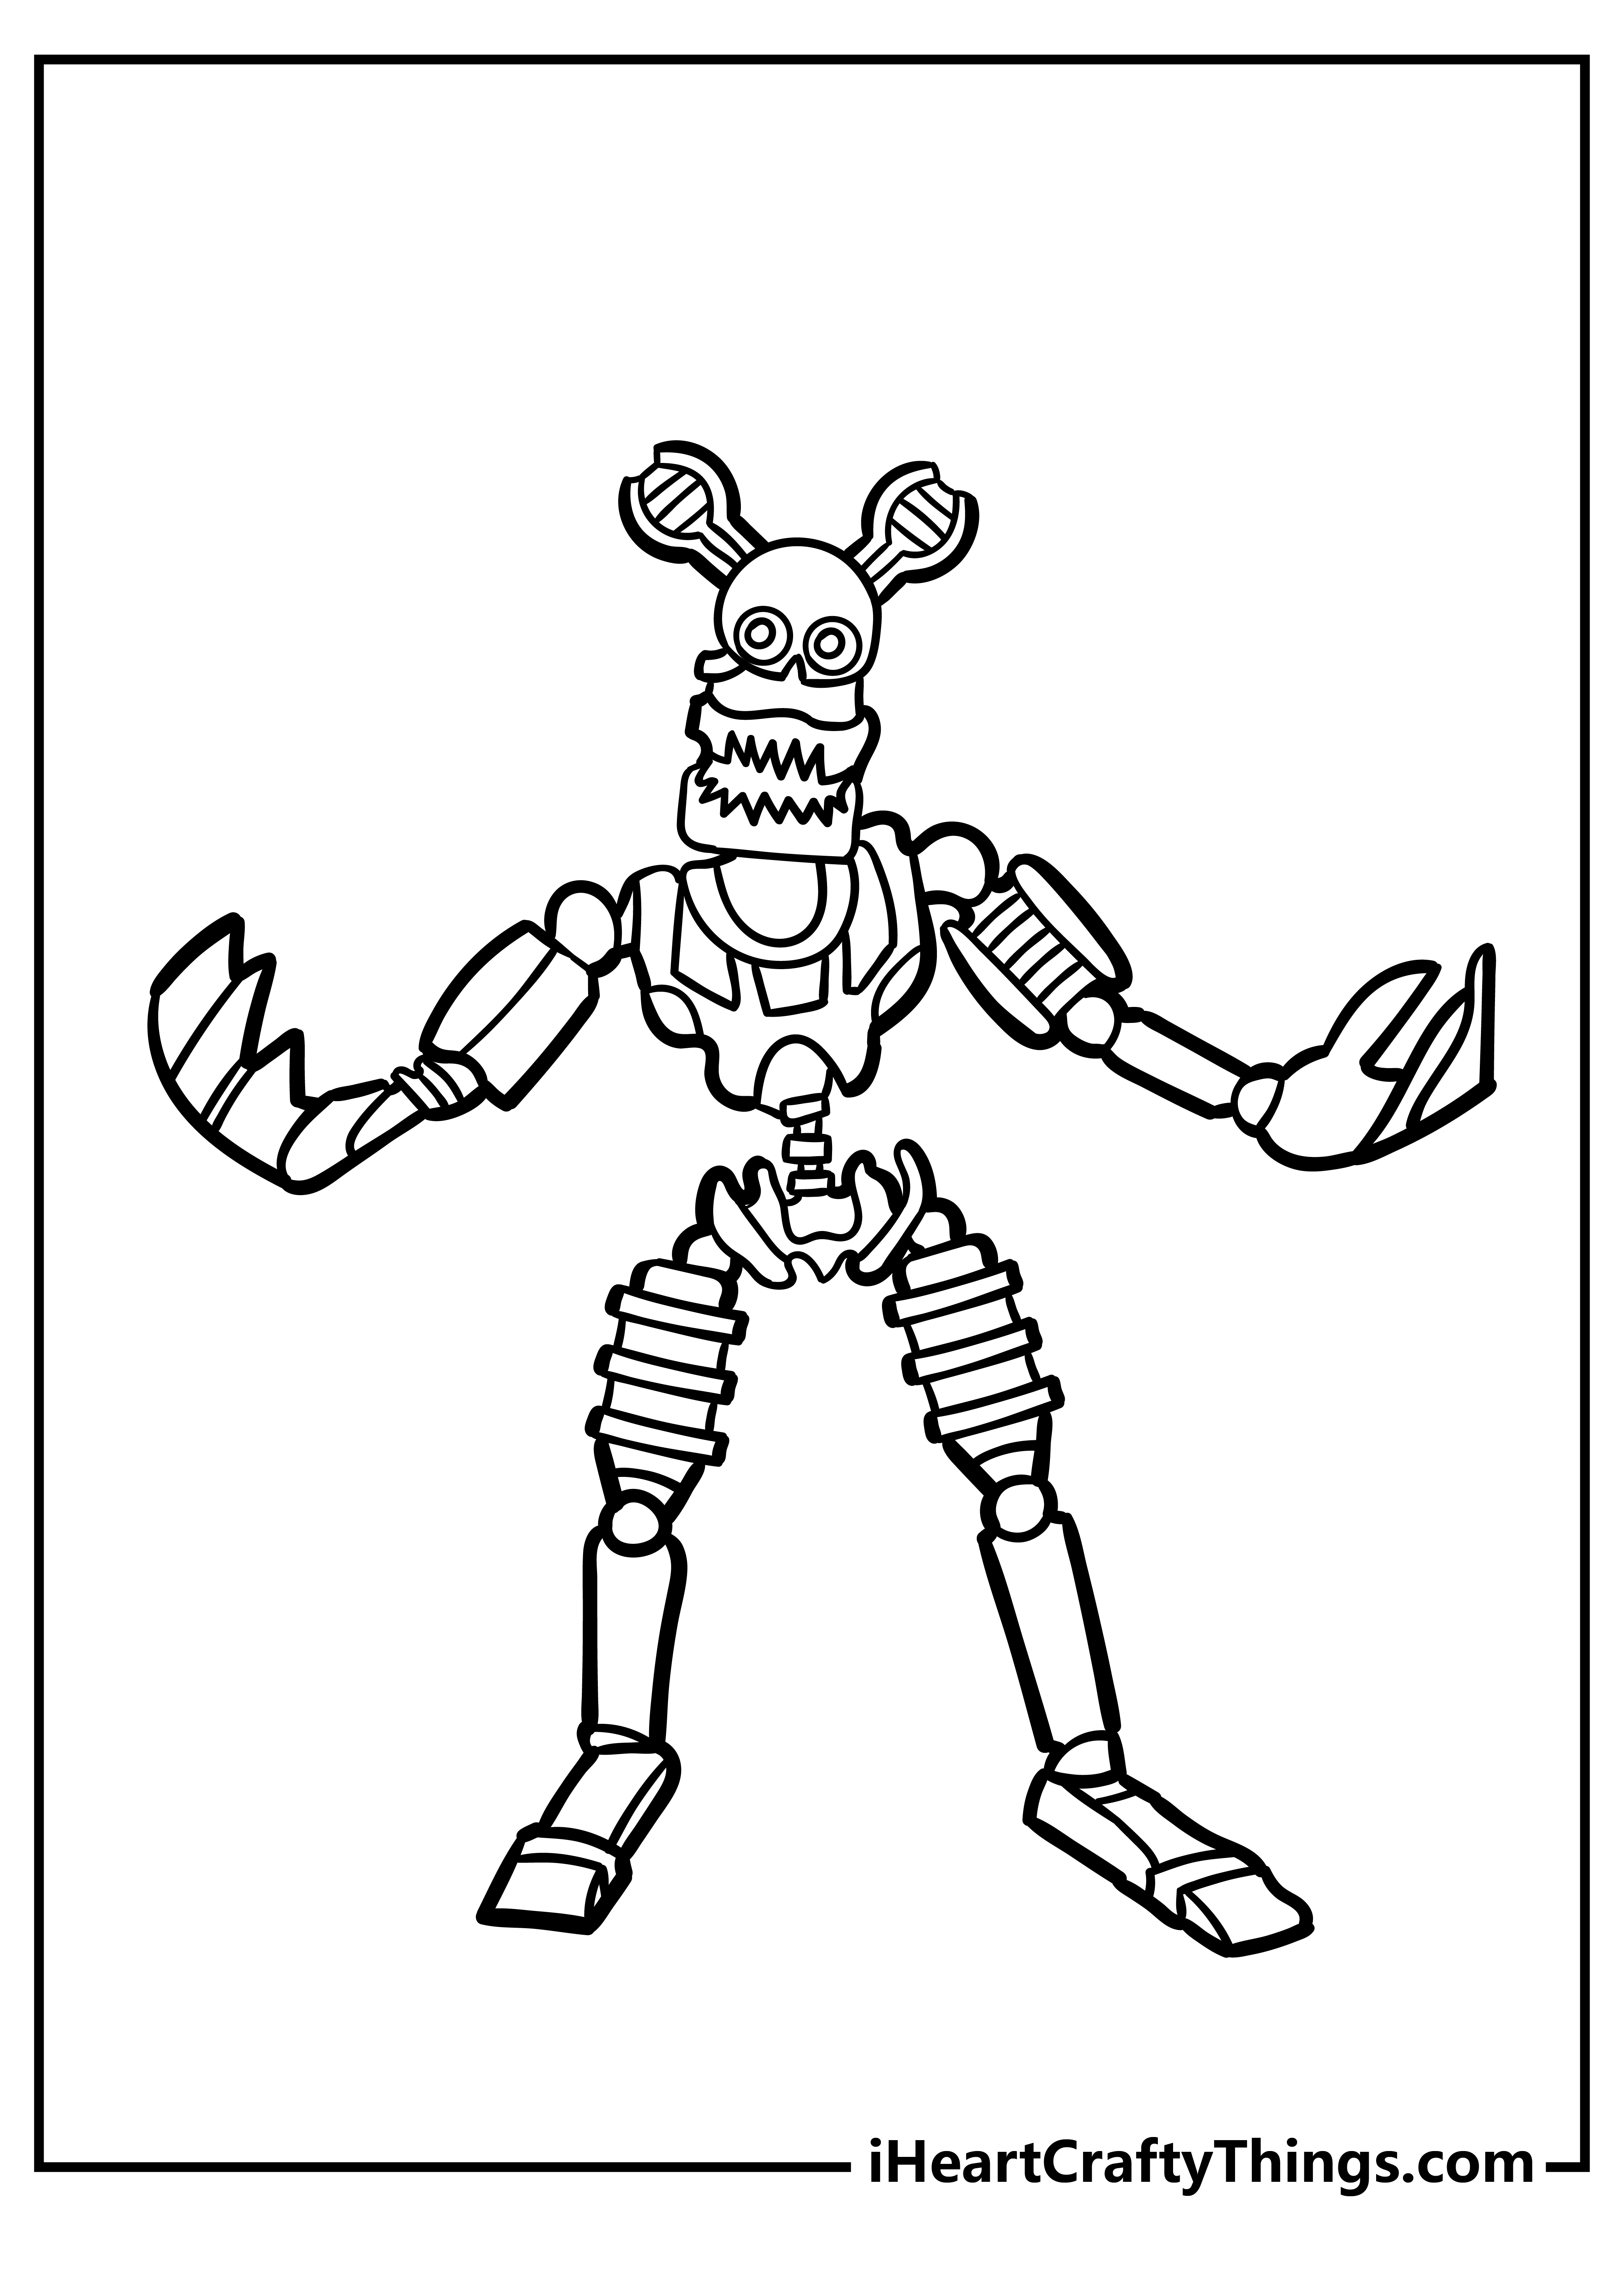 Free printable five nights at freddys fnaf coloring pages